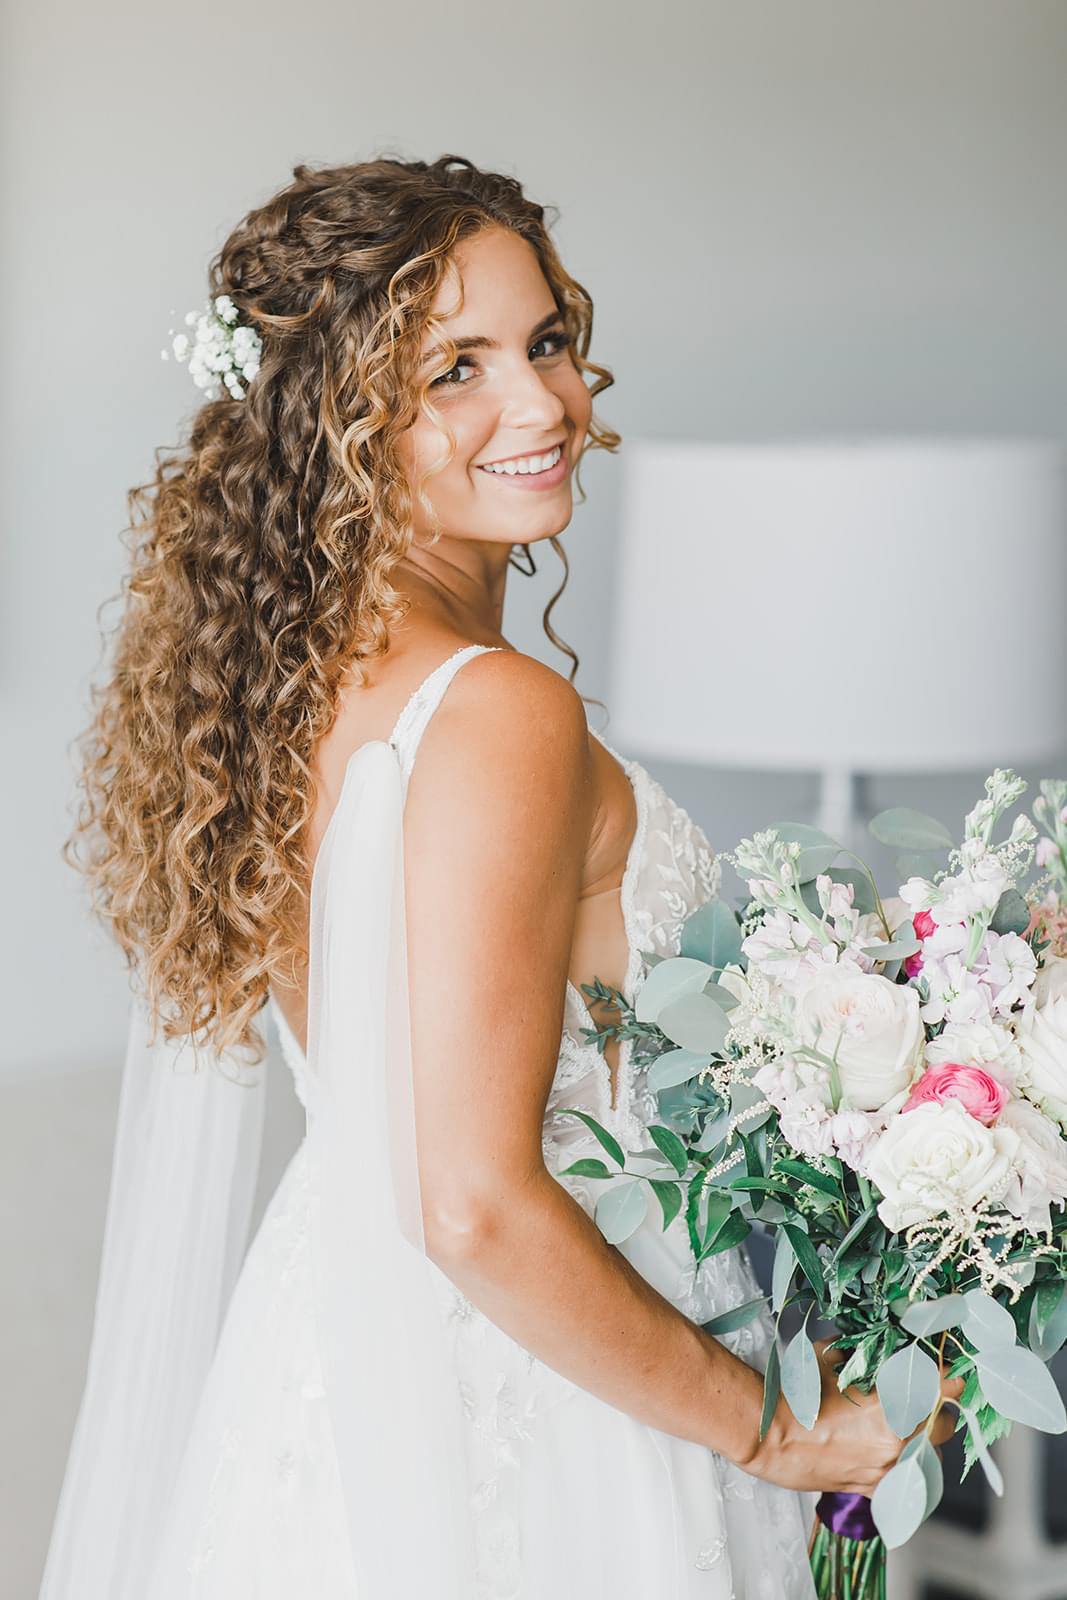 silk bridal wings pinned at shoulders on bride with natural and romantic curly hair with baby's breath flowers